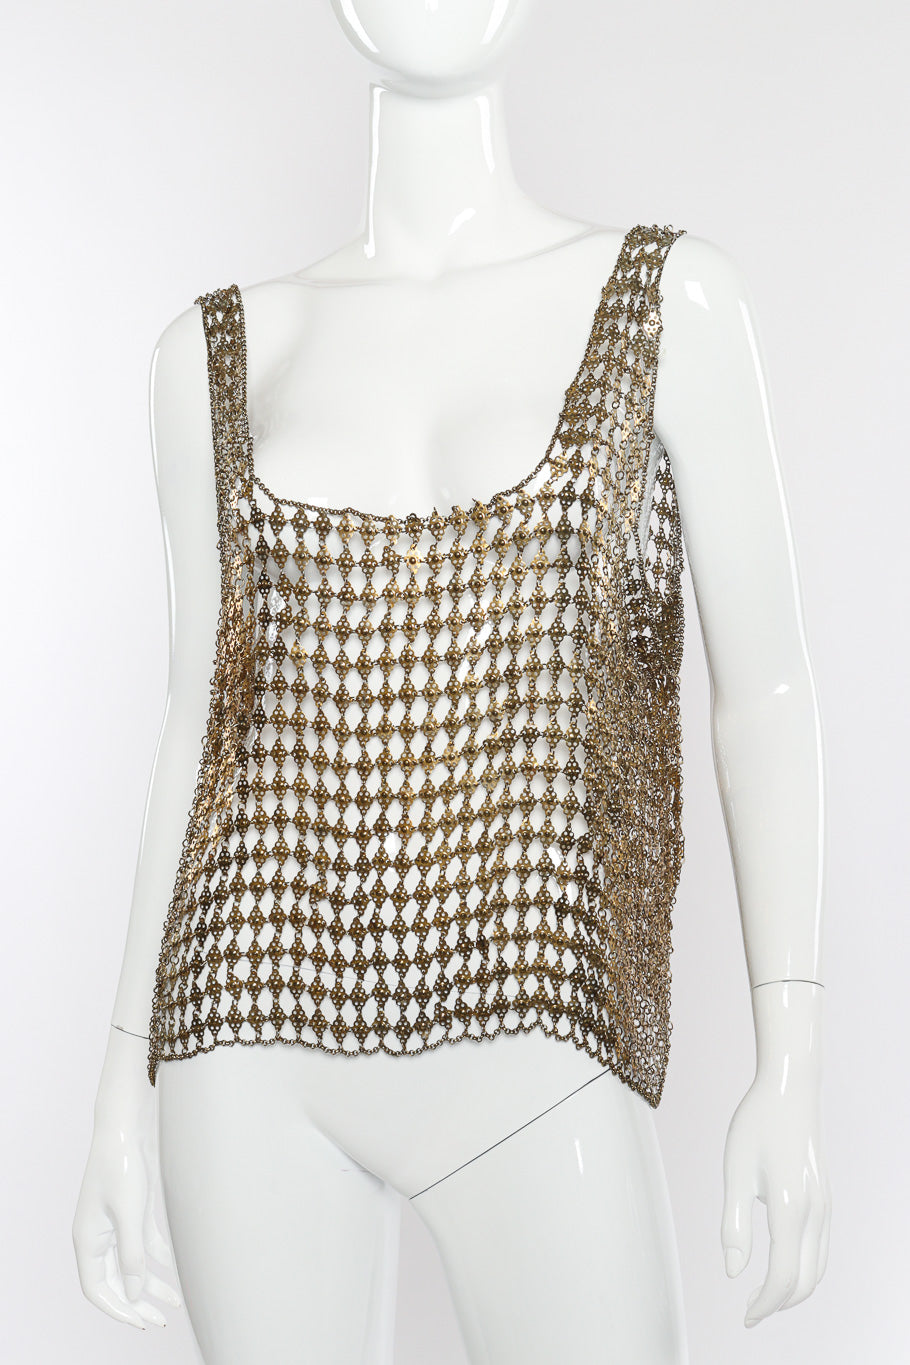 Vintage Chain Mail Tank Top front view on mannequin @recessla